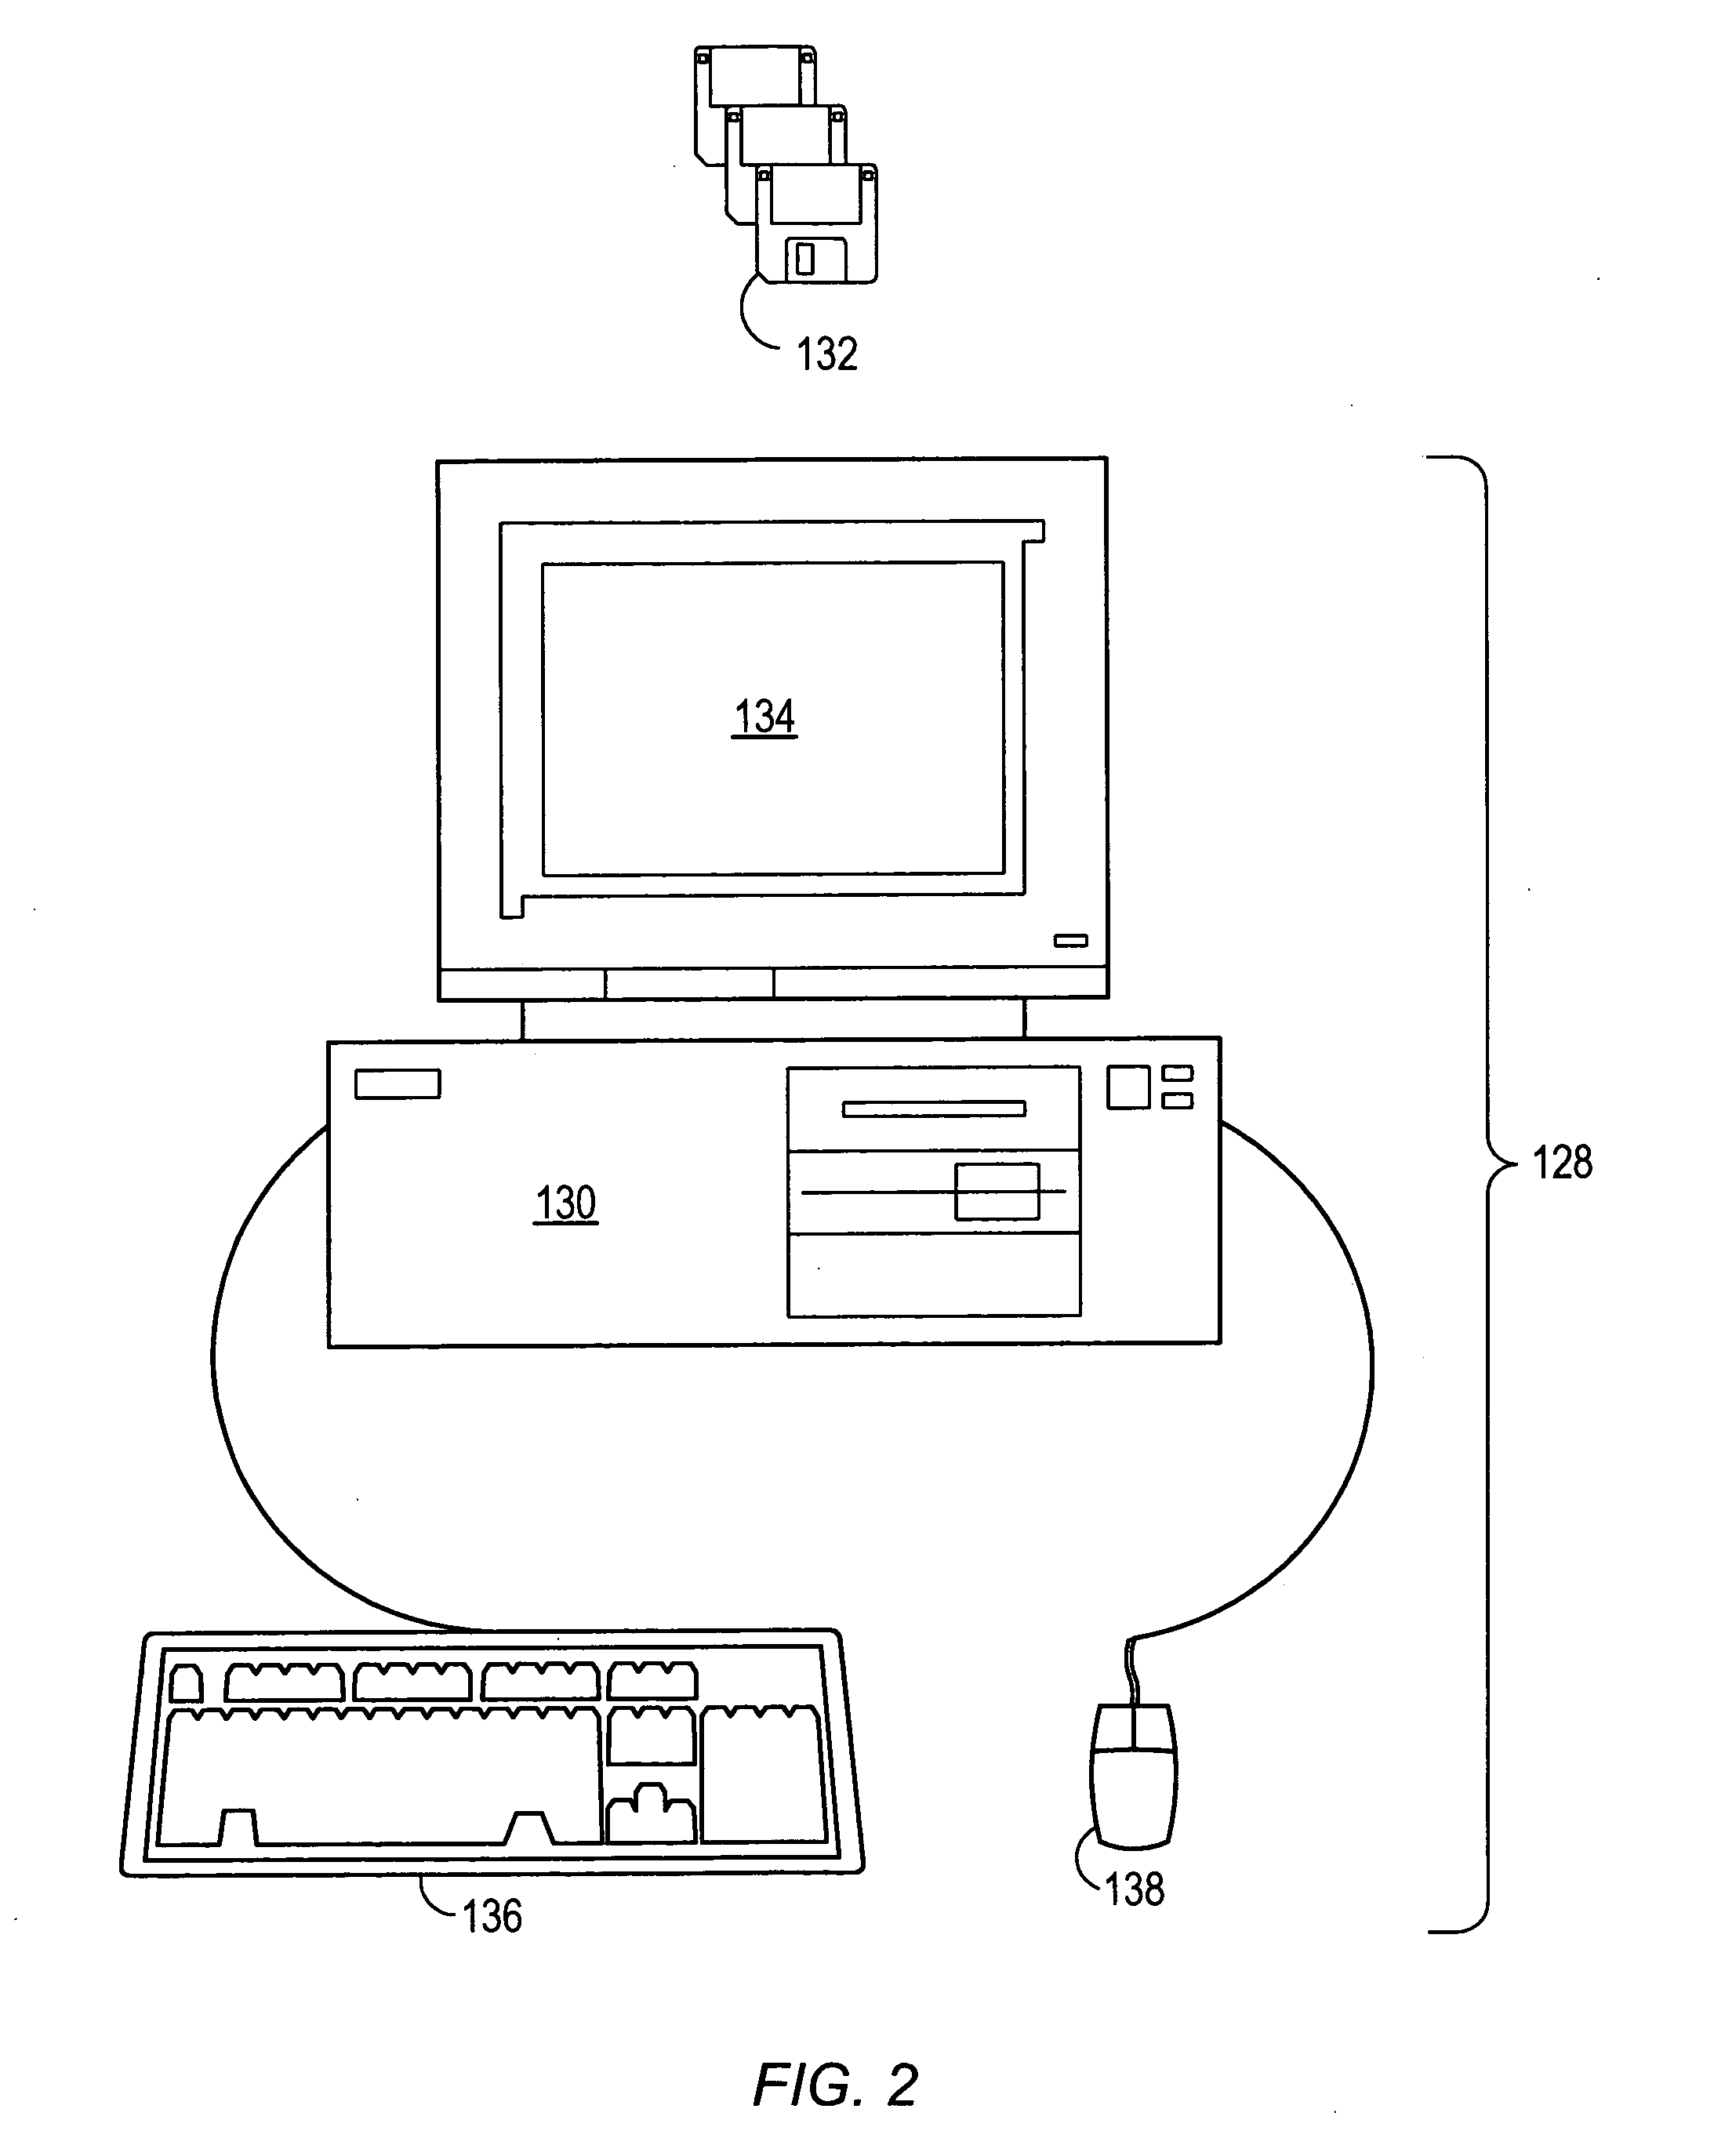 Method and system for image processing and assessment of a state of a heart